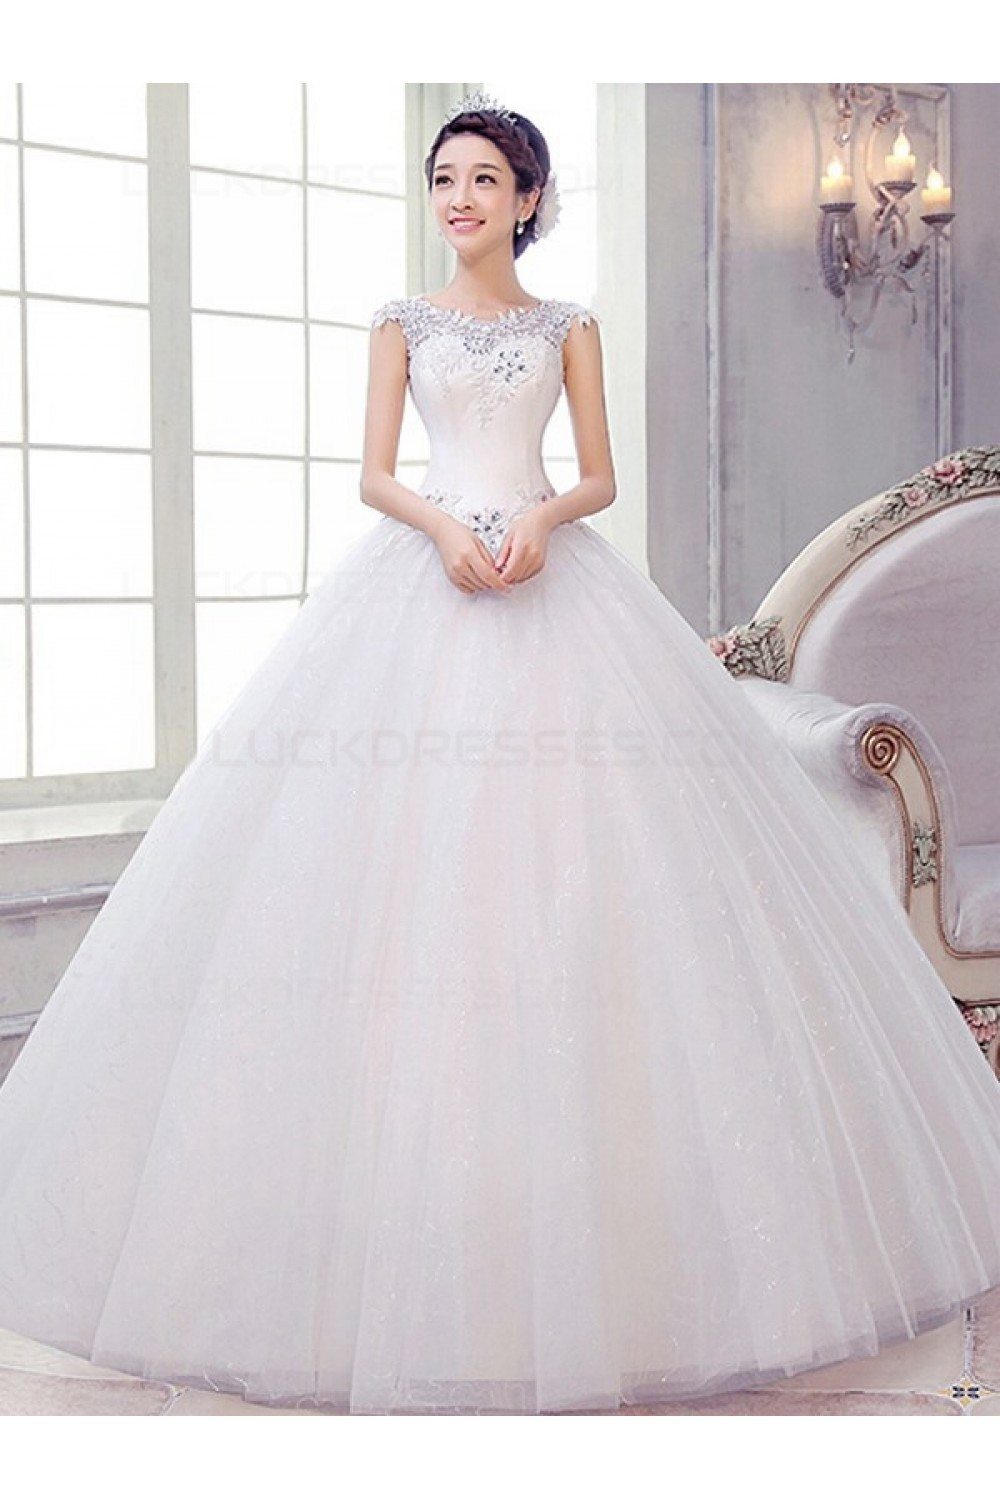 Sweetheart Wedding Gown
 Ball Gown Sweetheart Lace Wedding Dresses Bridal Gowns